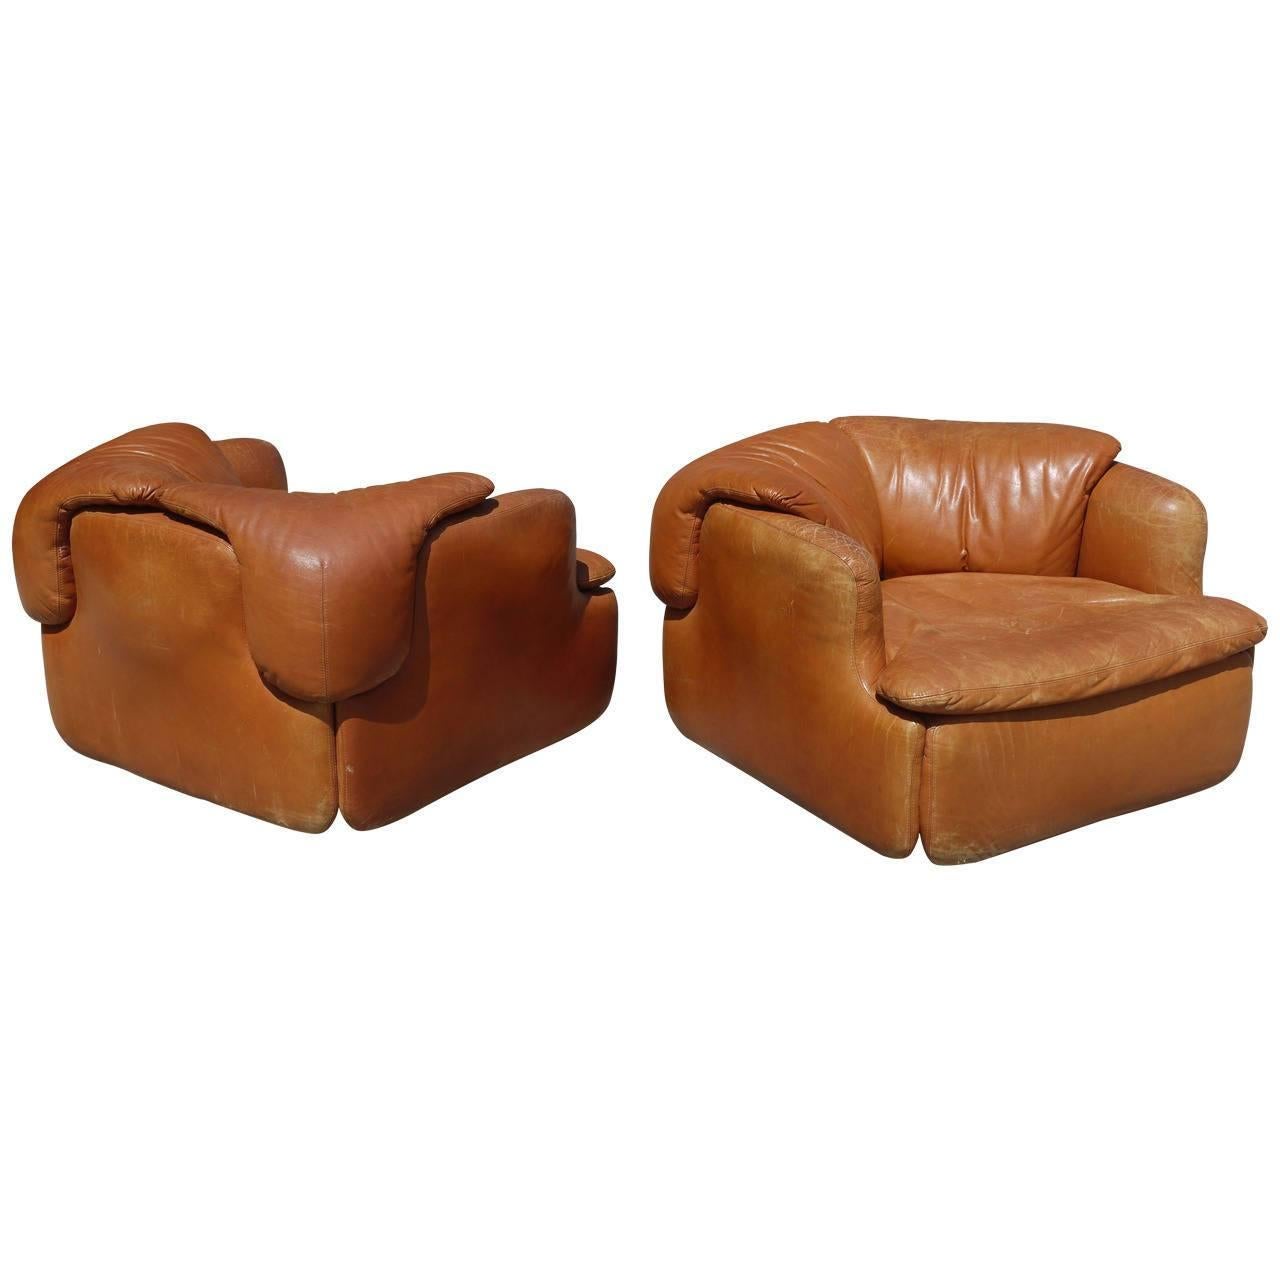 Pair of Leather Chairs by Alberto Rosselli for Saporiti For Sale